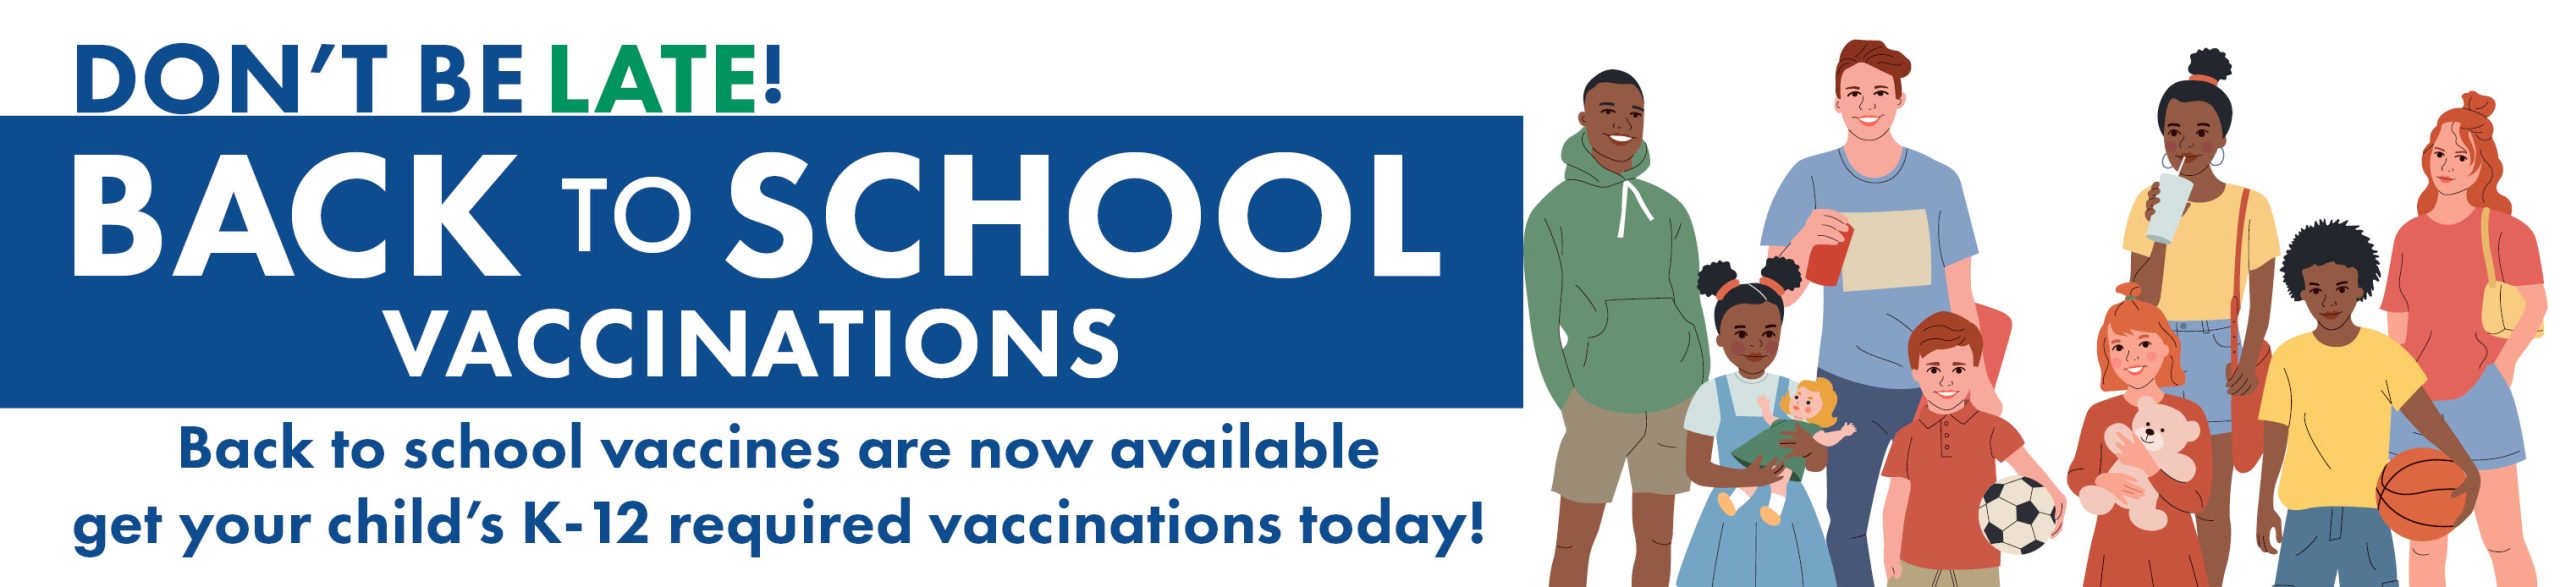 Don't be late - Back to School Vaccinations - Back to School vaccines are now available get your child's K-12 required vaccinaitons today! *Illustration of diverse group of children and teens*